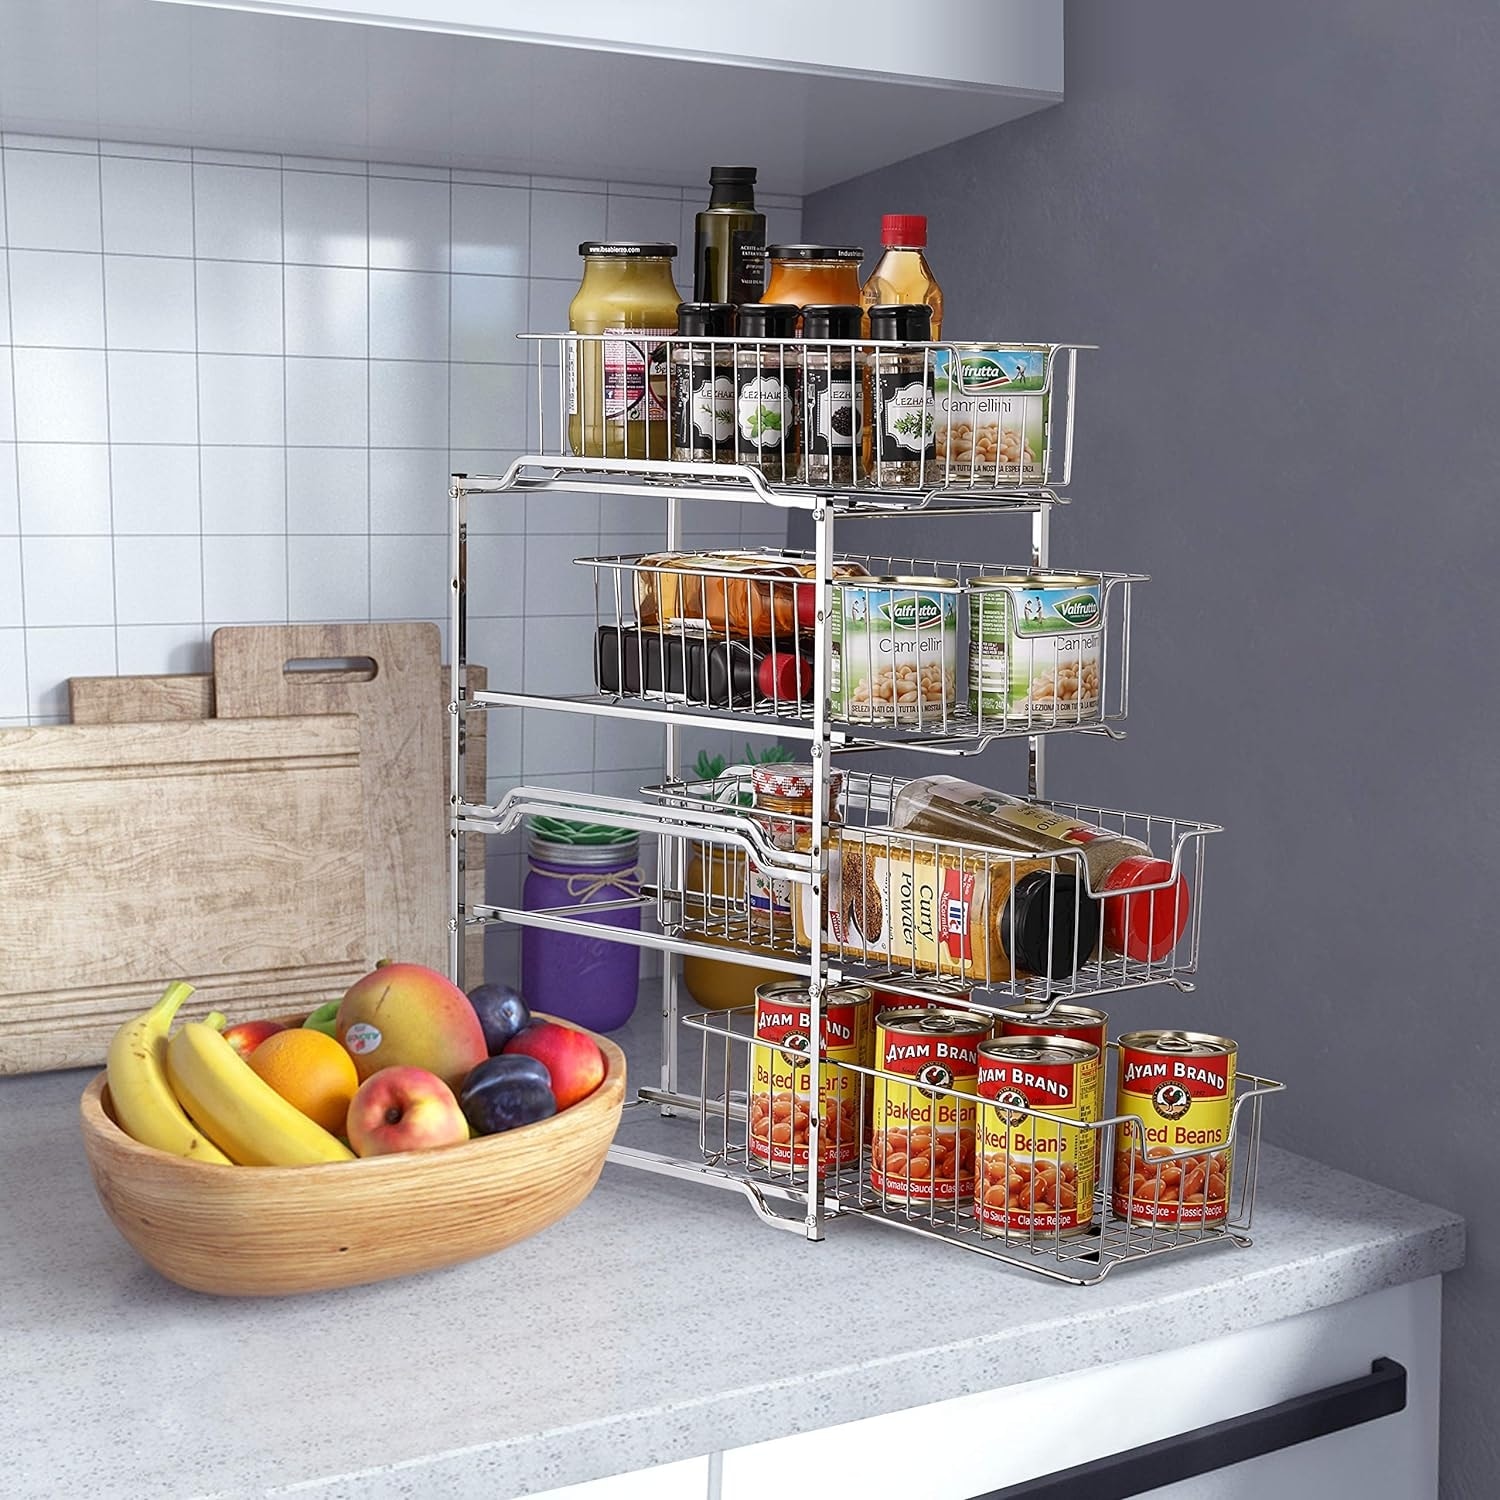 https://ak1.ostkcdn.com/images/products/is/images/direct/d3beb30d764ca8c04c5f5d0bb49bee17e0b263ad/Stackable-2-Tier-Under-Sink-Cabinet-Organizer-with-Sliding-Storage-Drawer.jpg